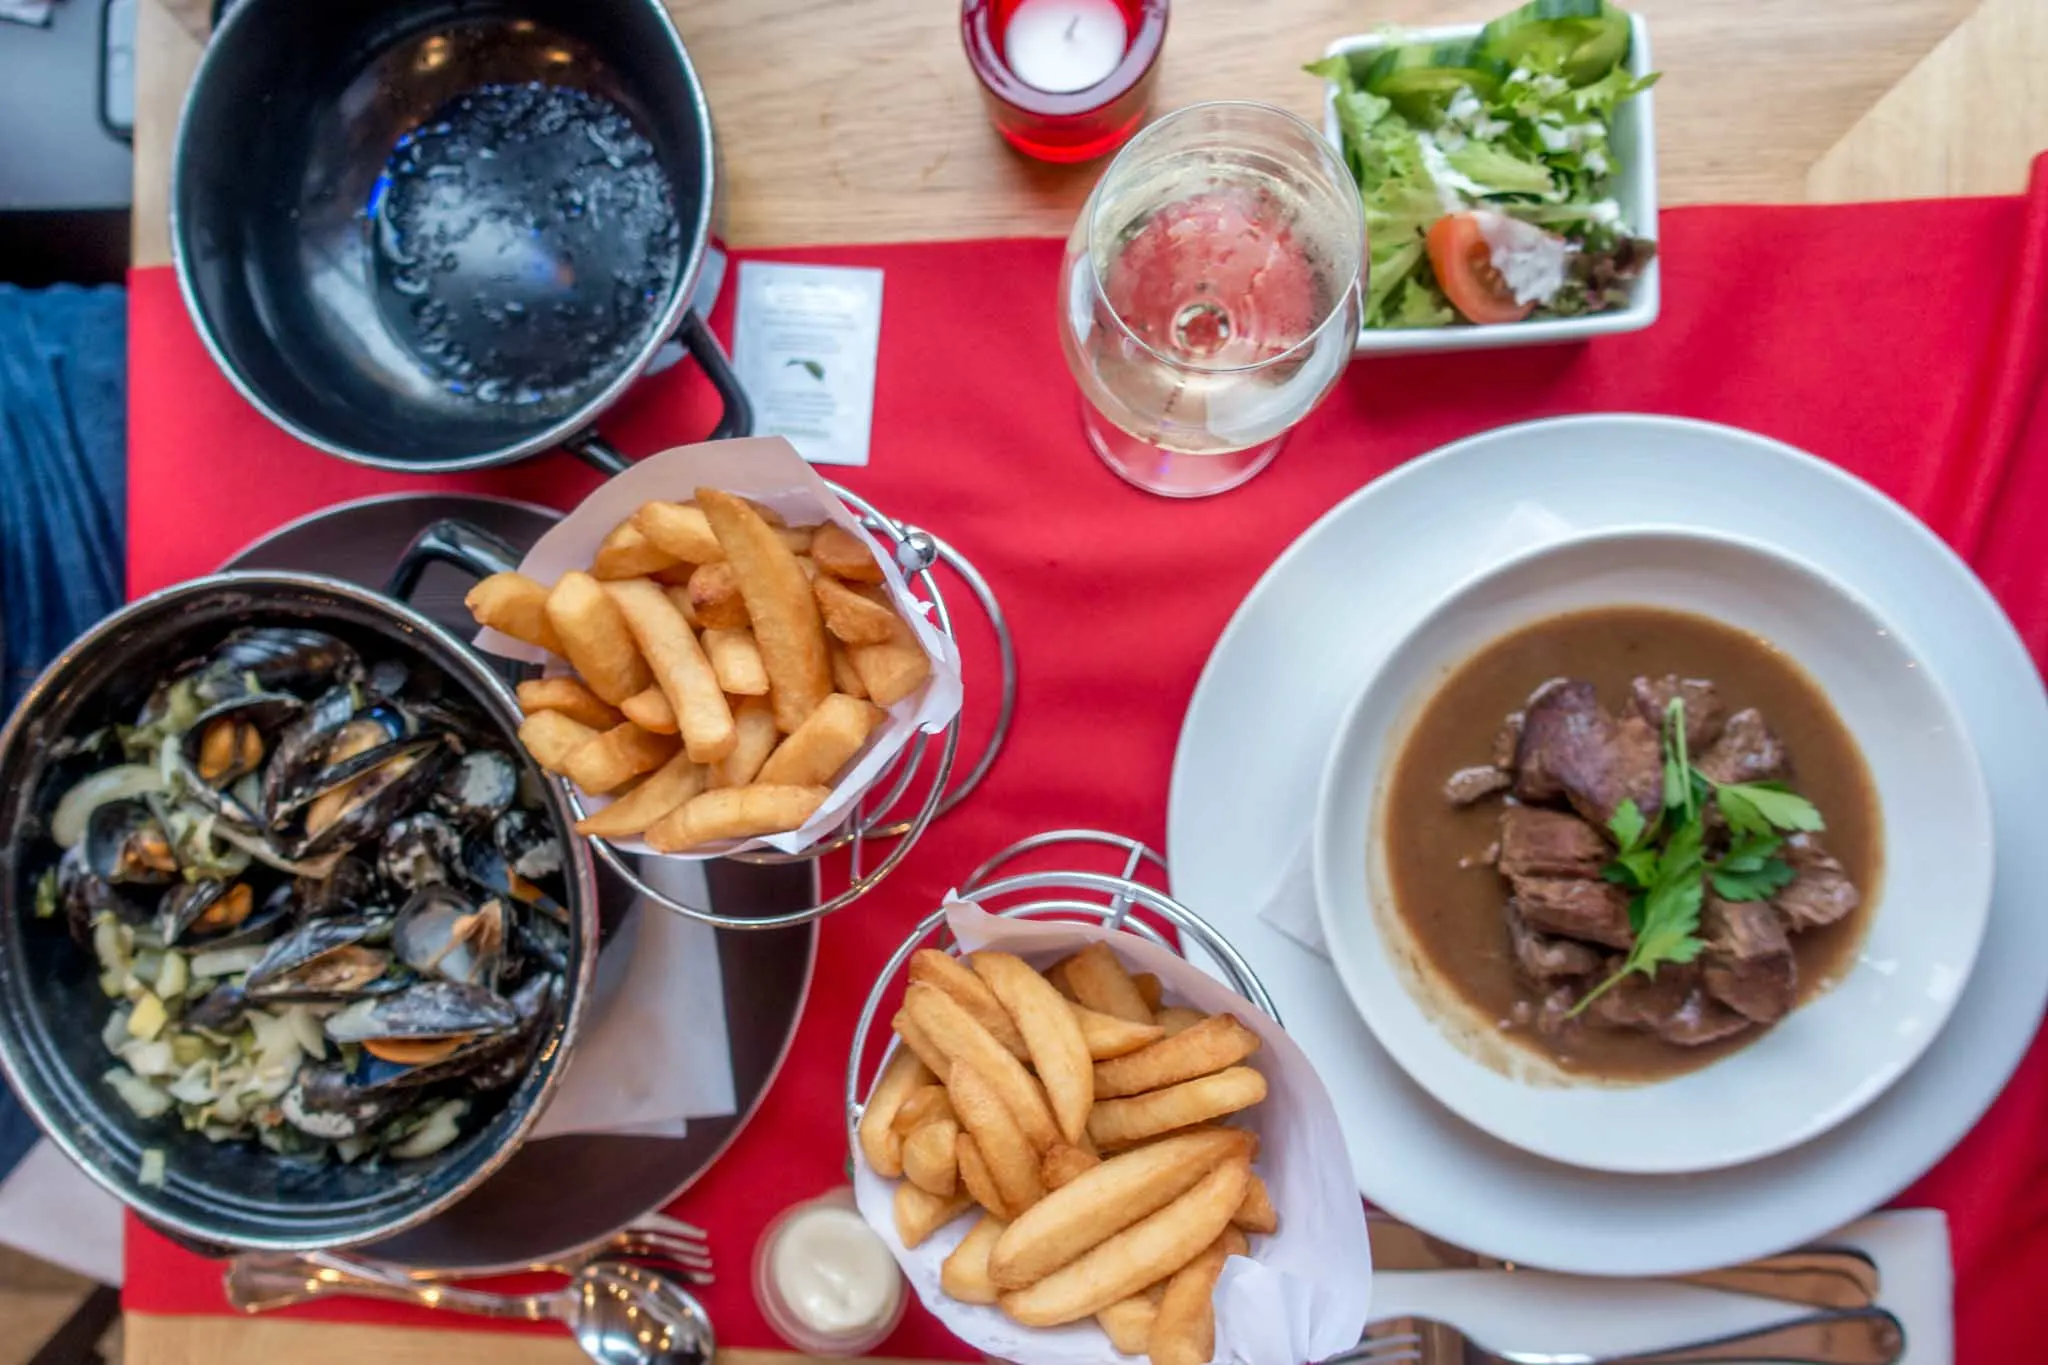 Frites, mussels, and other Belgian food on table.